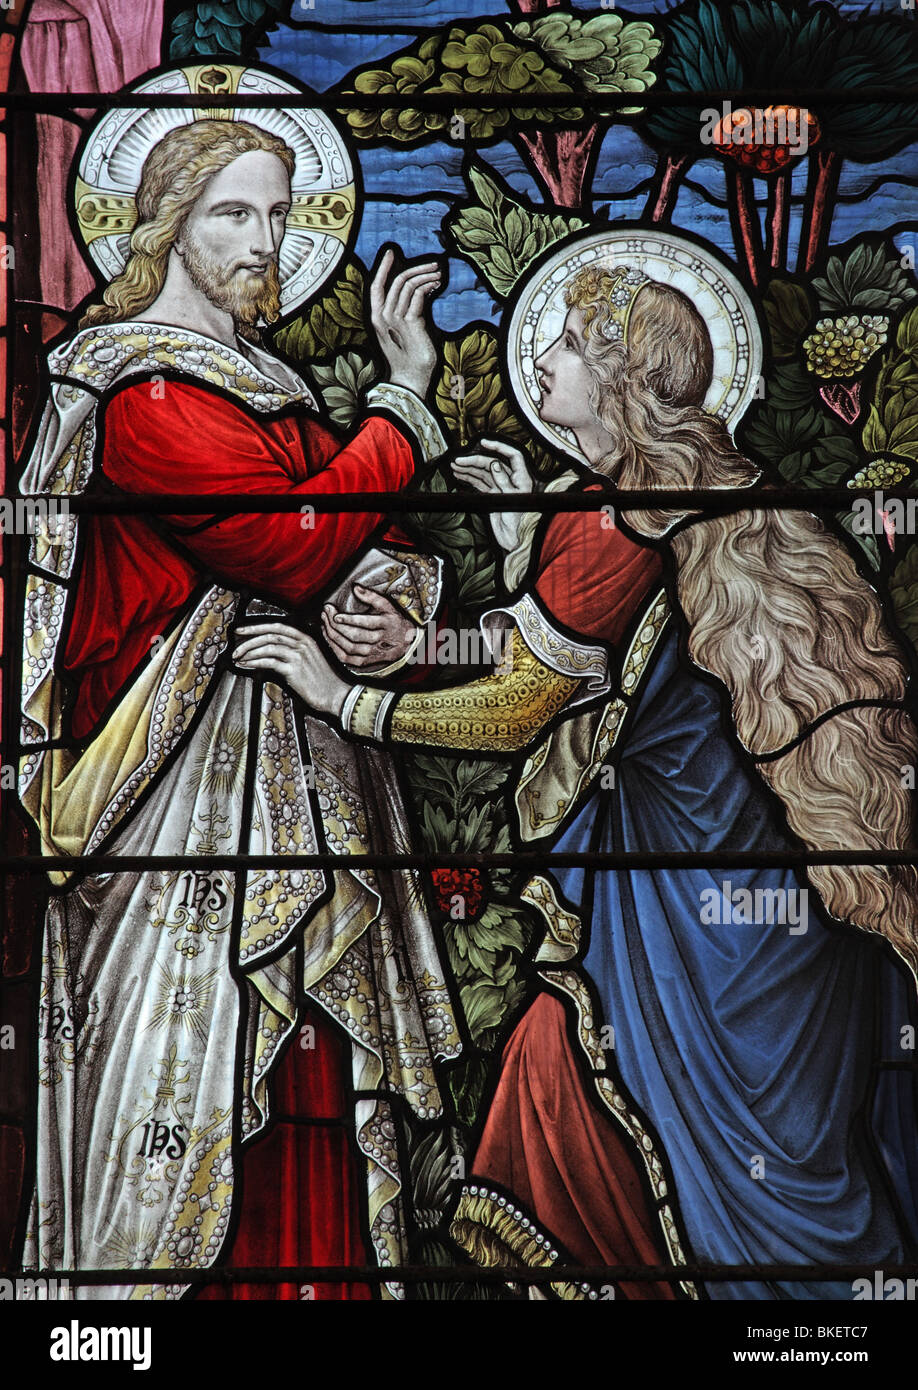 A stained glass window depicting Mary Magdalene meeting the resurrected Jesus at the Sepulchre, Waterfall, Derbyshire, England Stock Photo